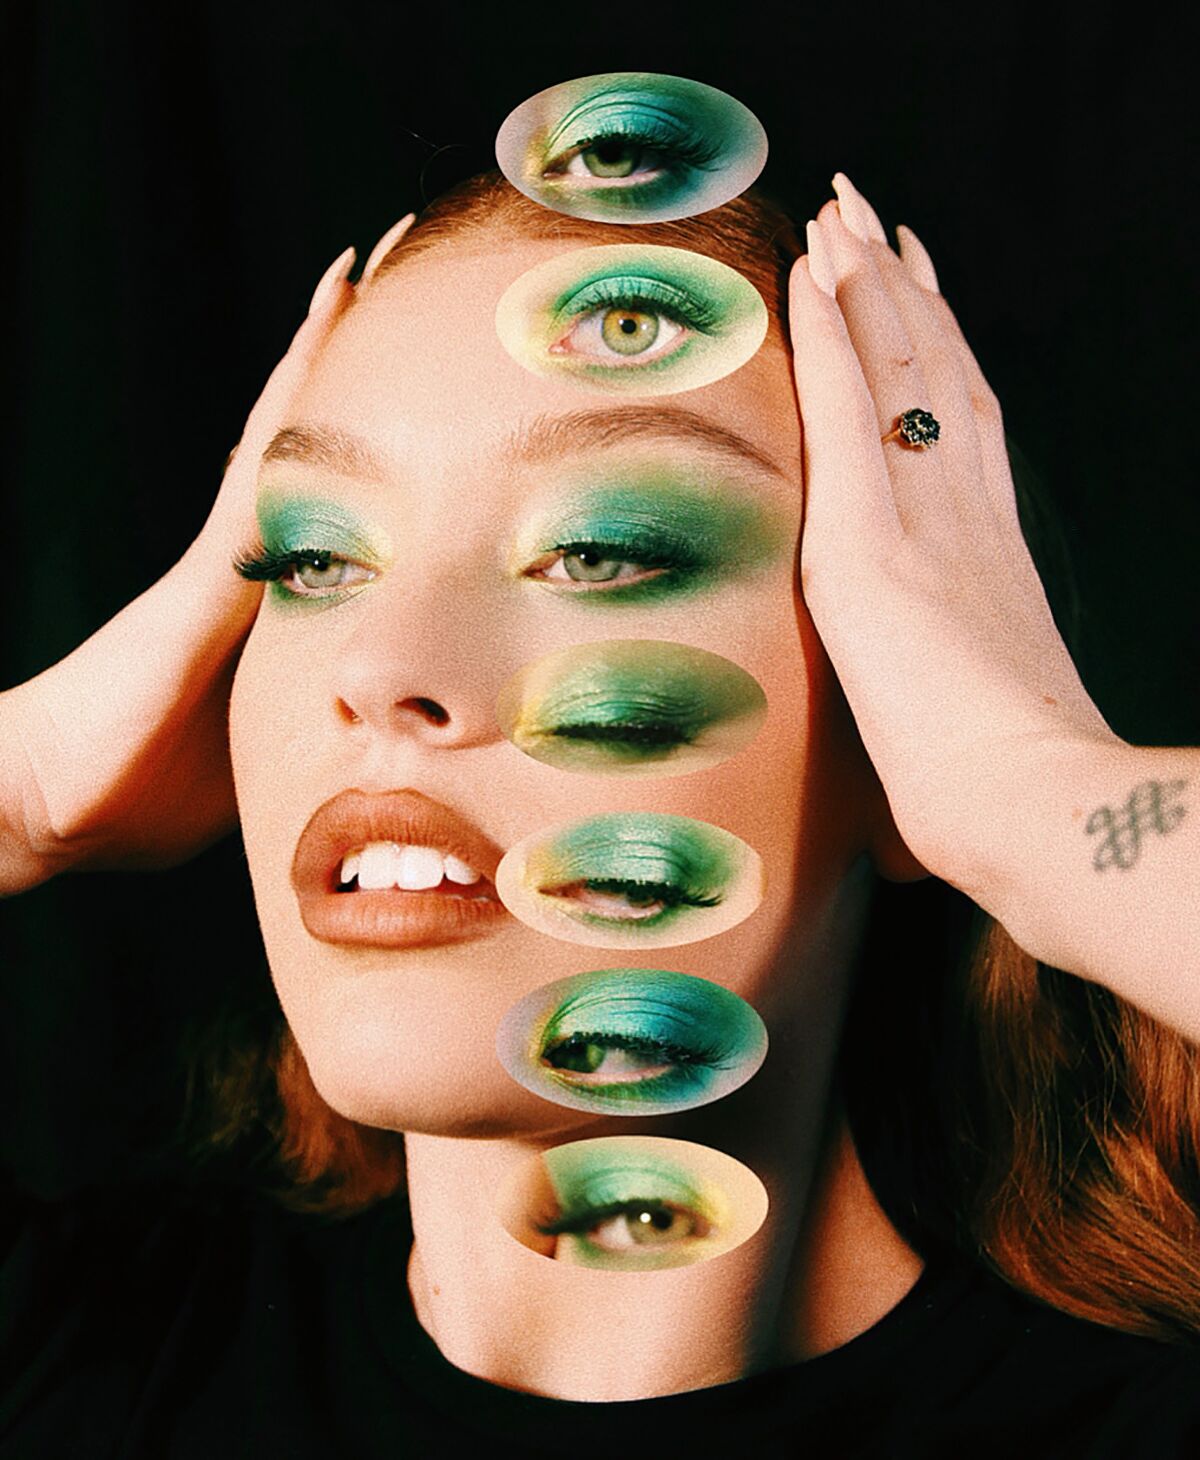 A psychedelic photo of a woman's head and six free-floating eyes with green eyeshadow.